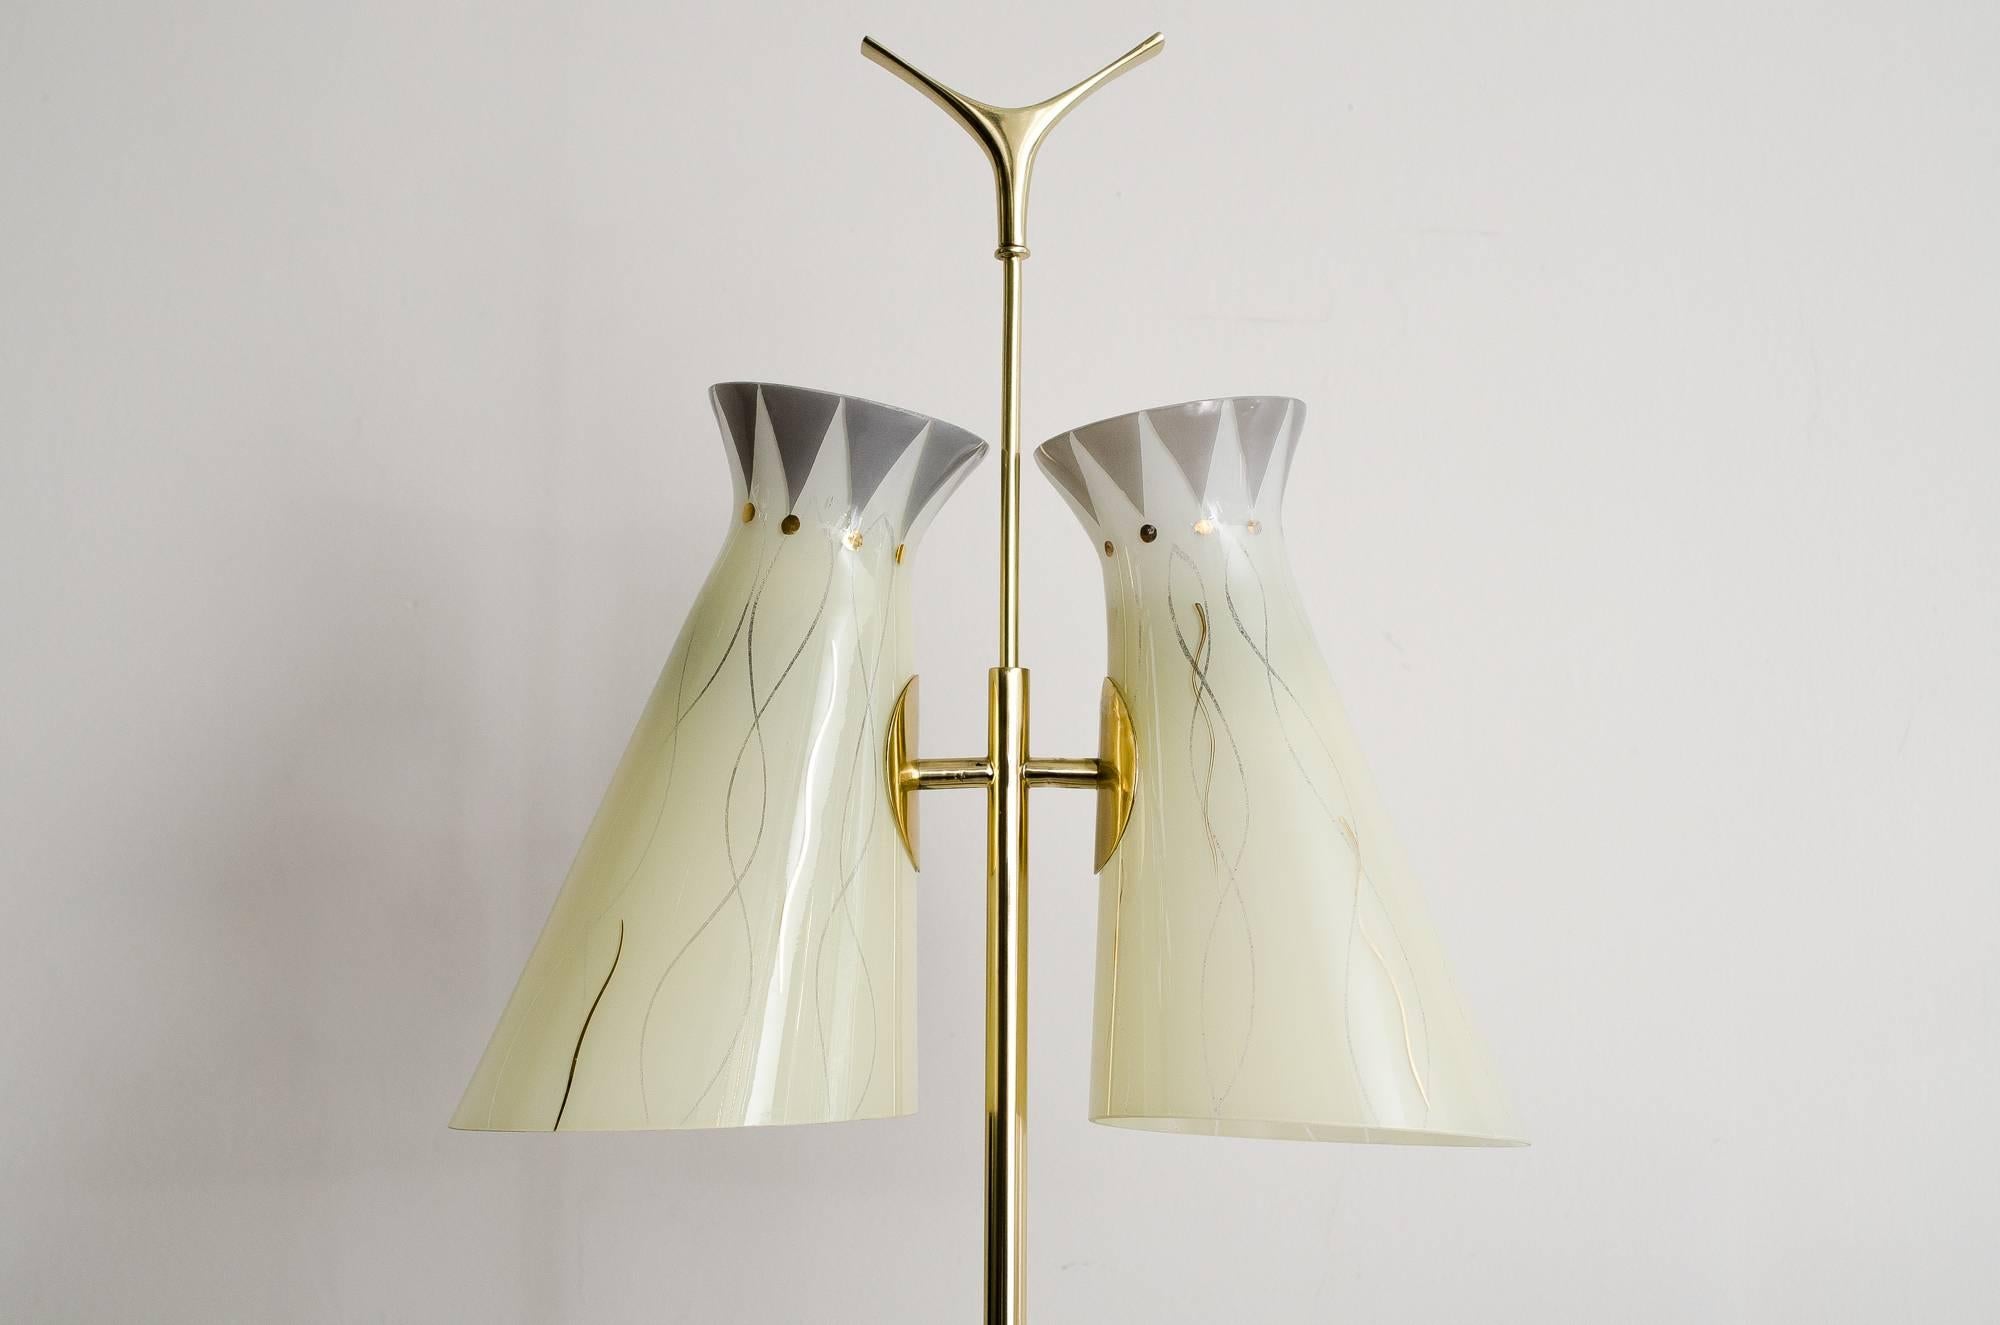 Rupert Nikoll floor lamp with original glass shades
polished and stove enameled.